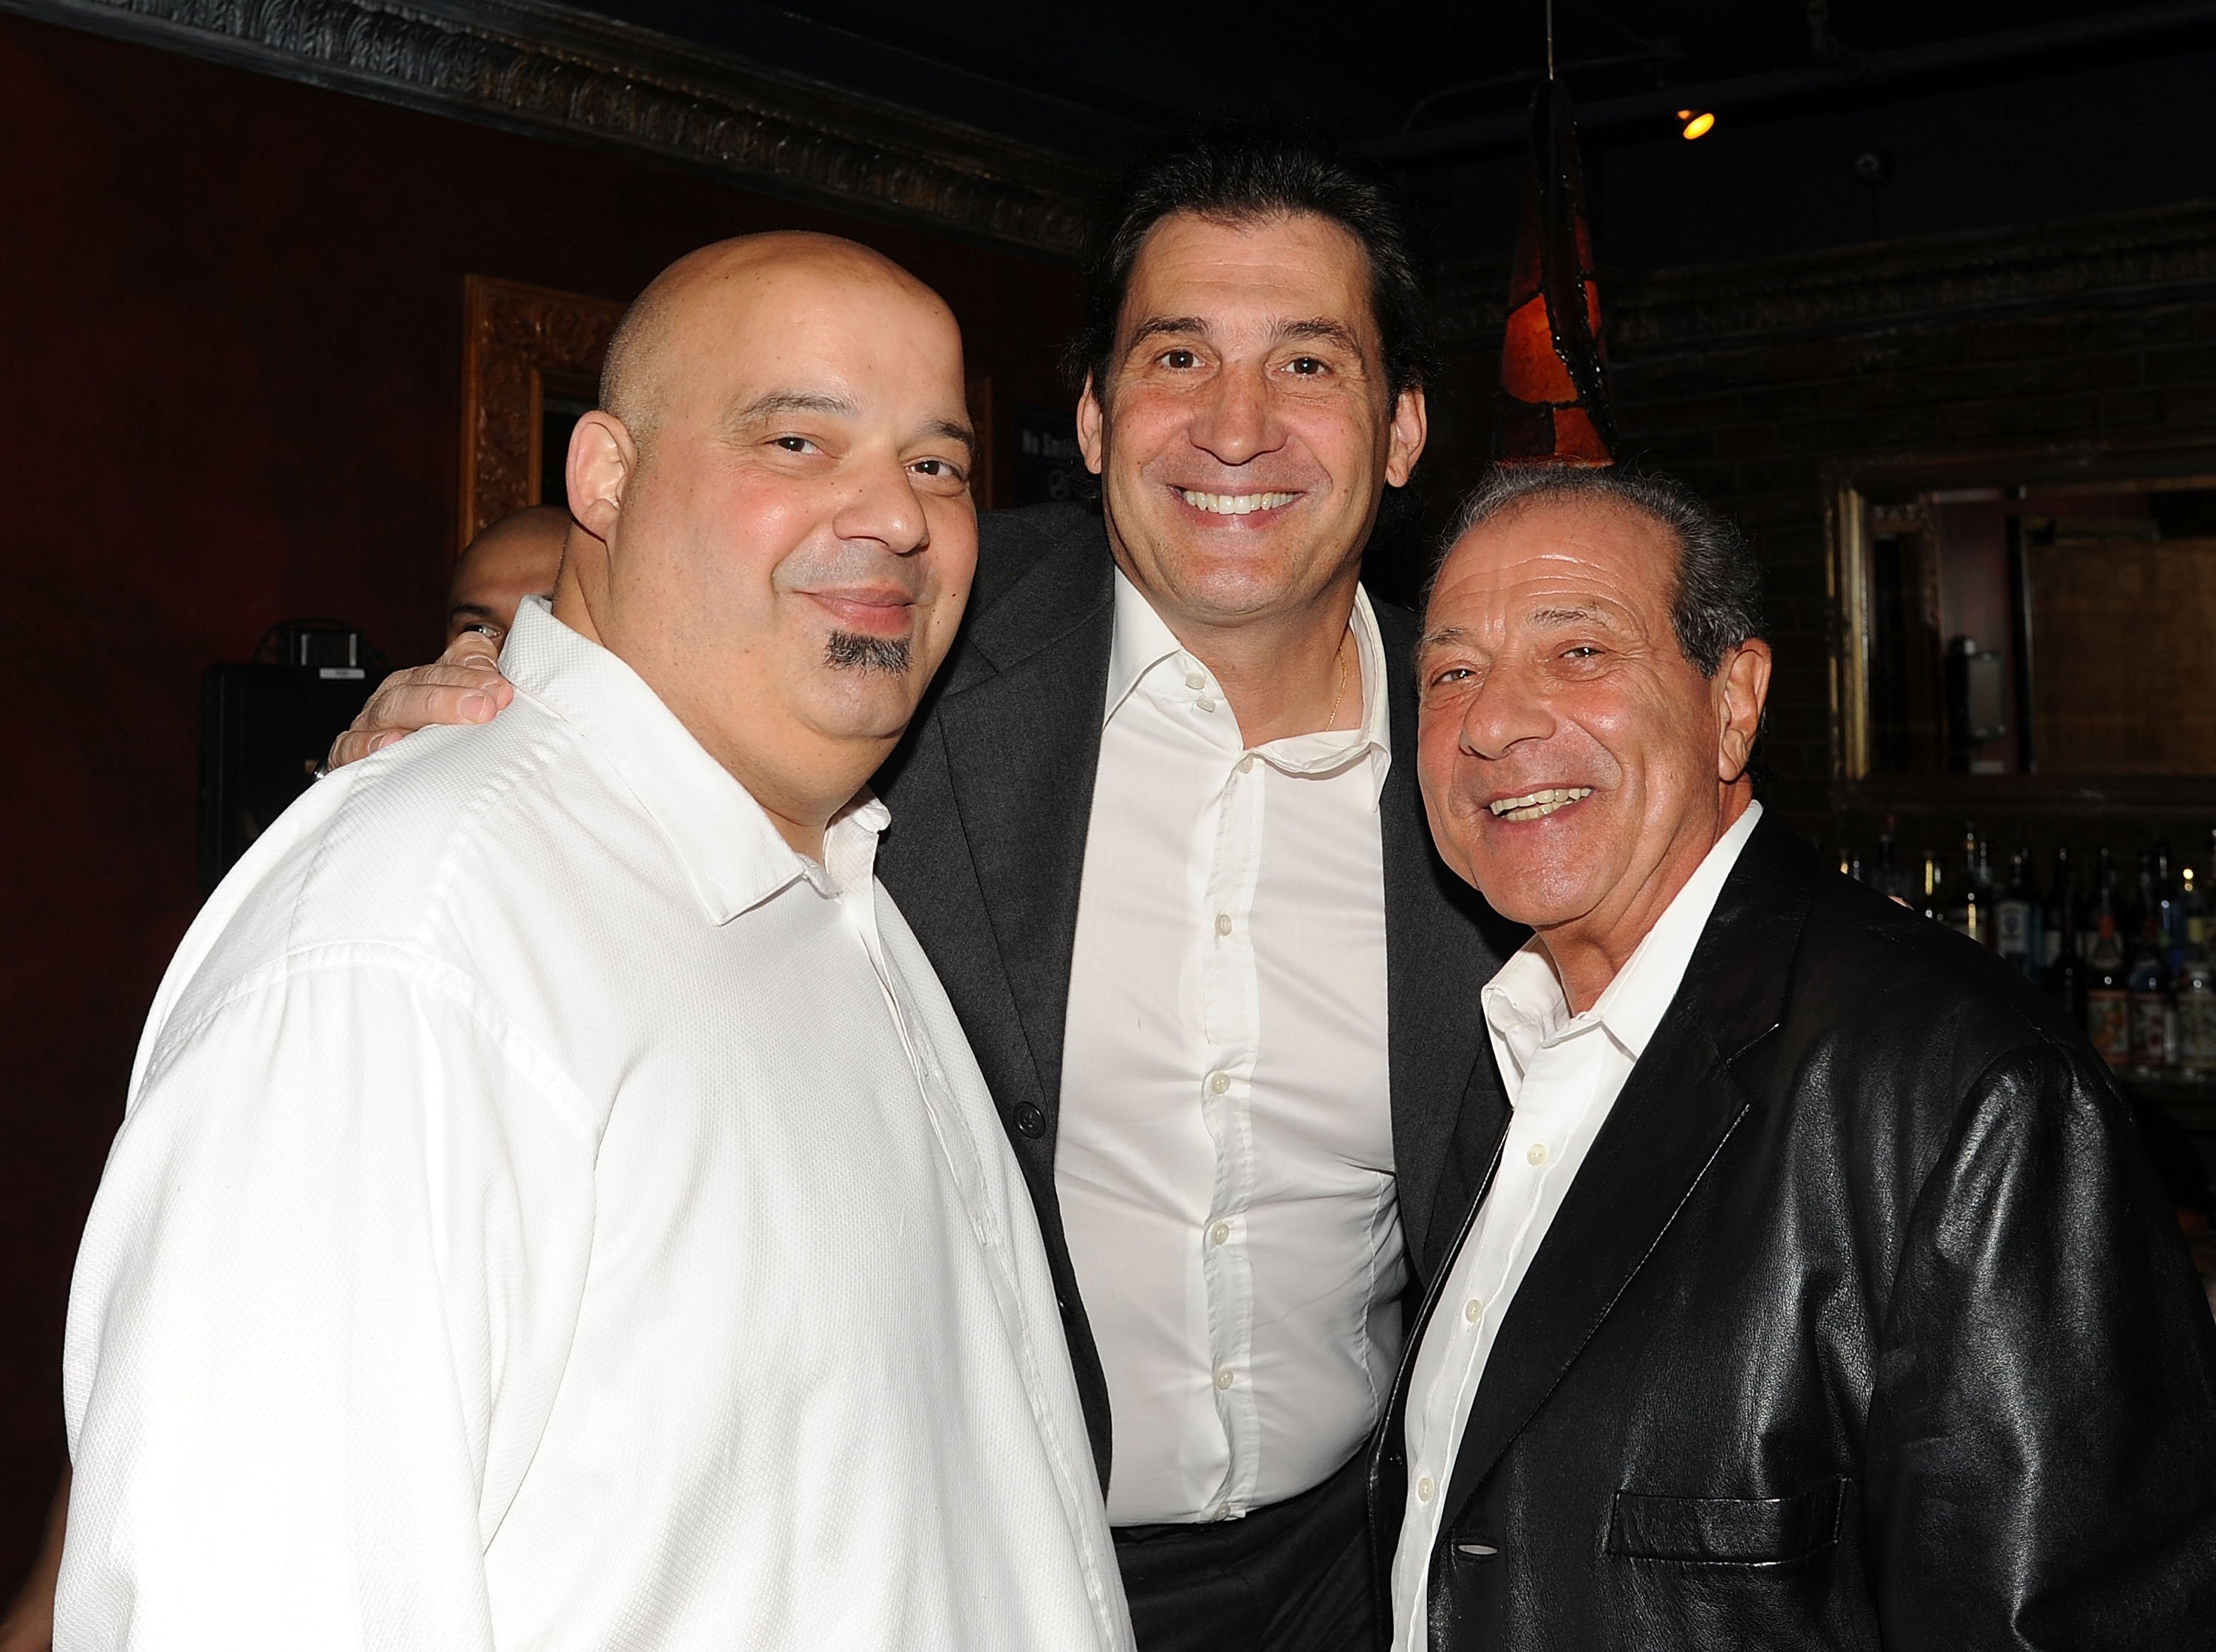 Robert Funaro and two 'Sopranos' actors smile for the camera